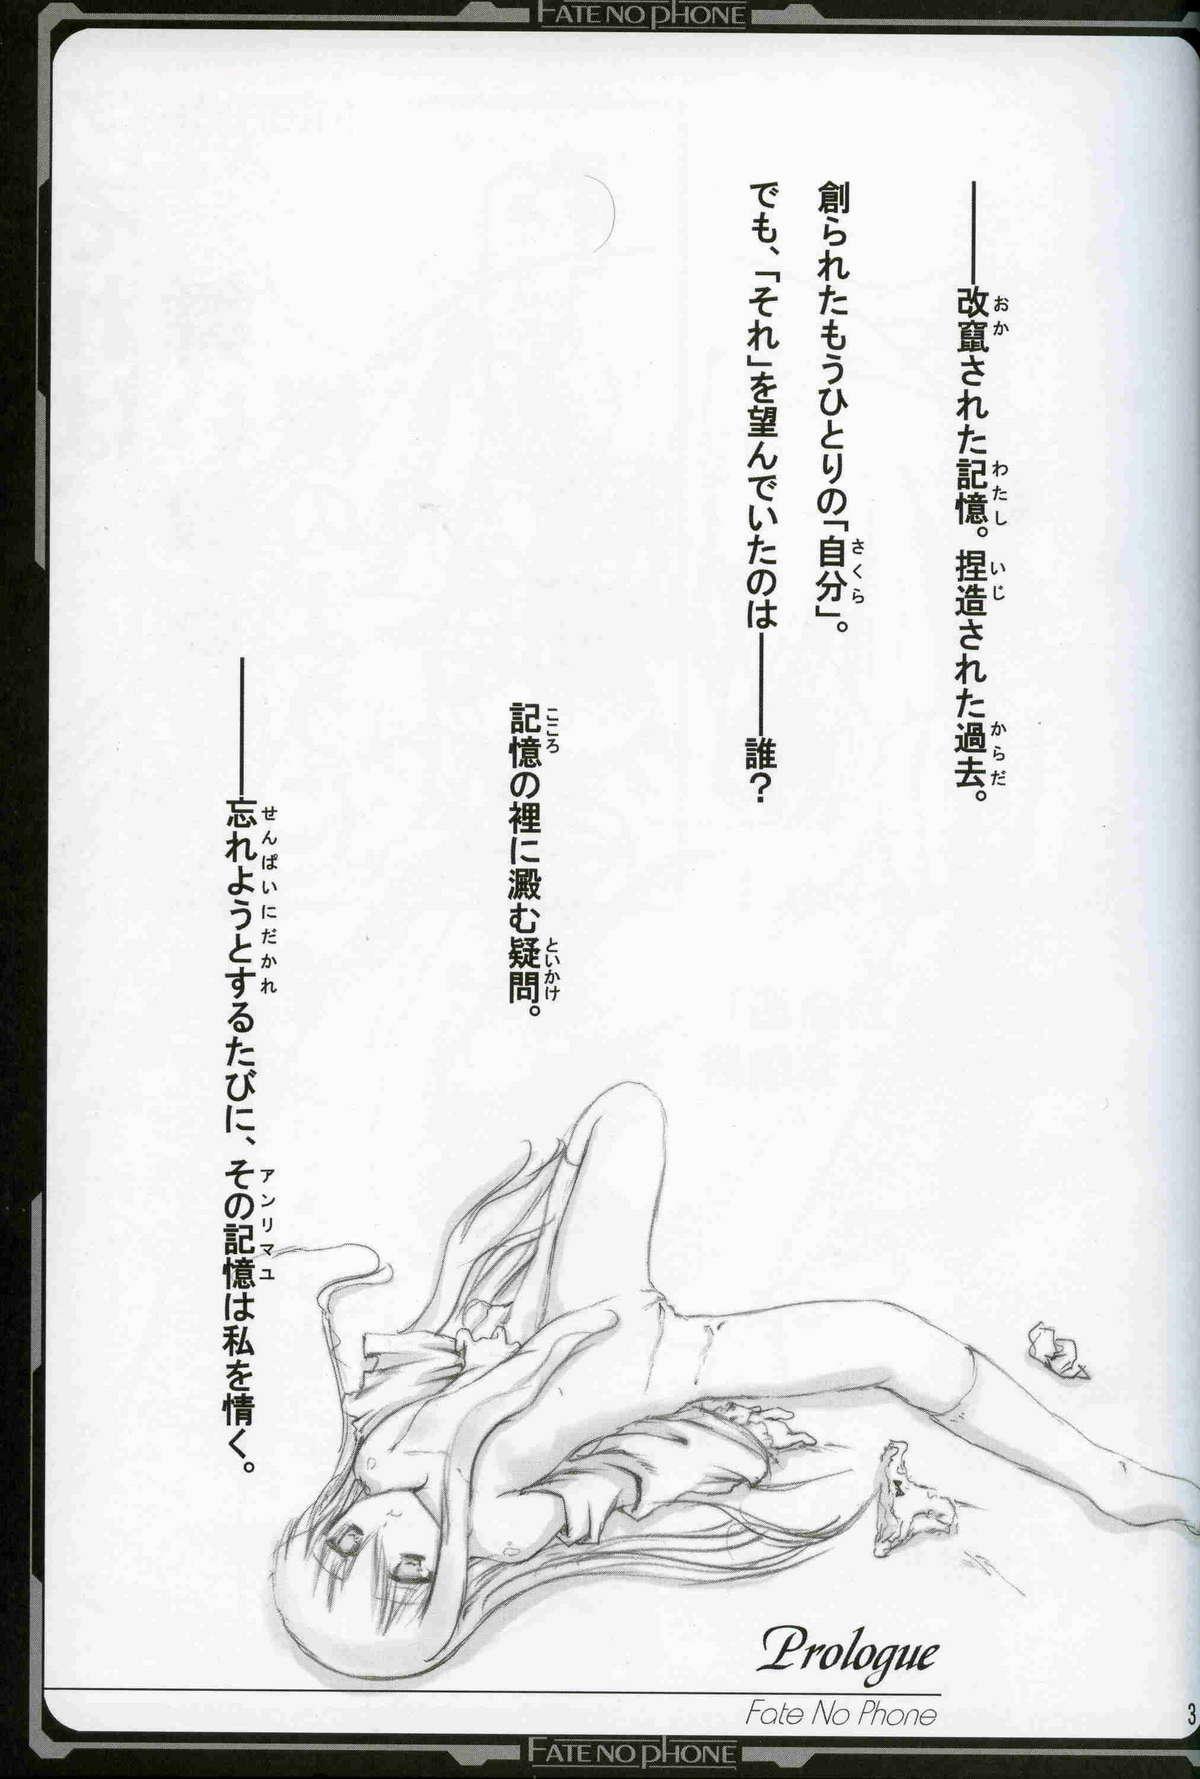 Teenage Sex Fate/no phone - Fate stay night Cocksucker - Page 2